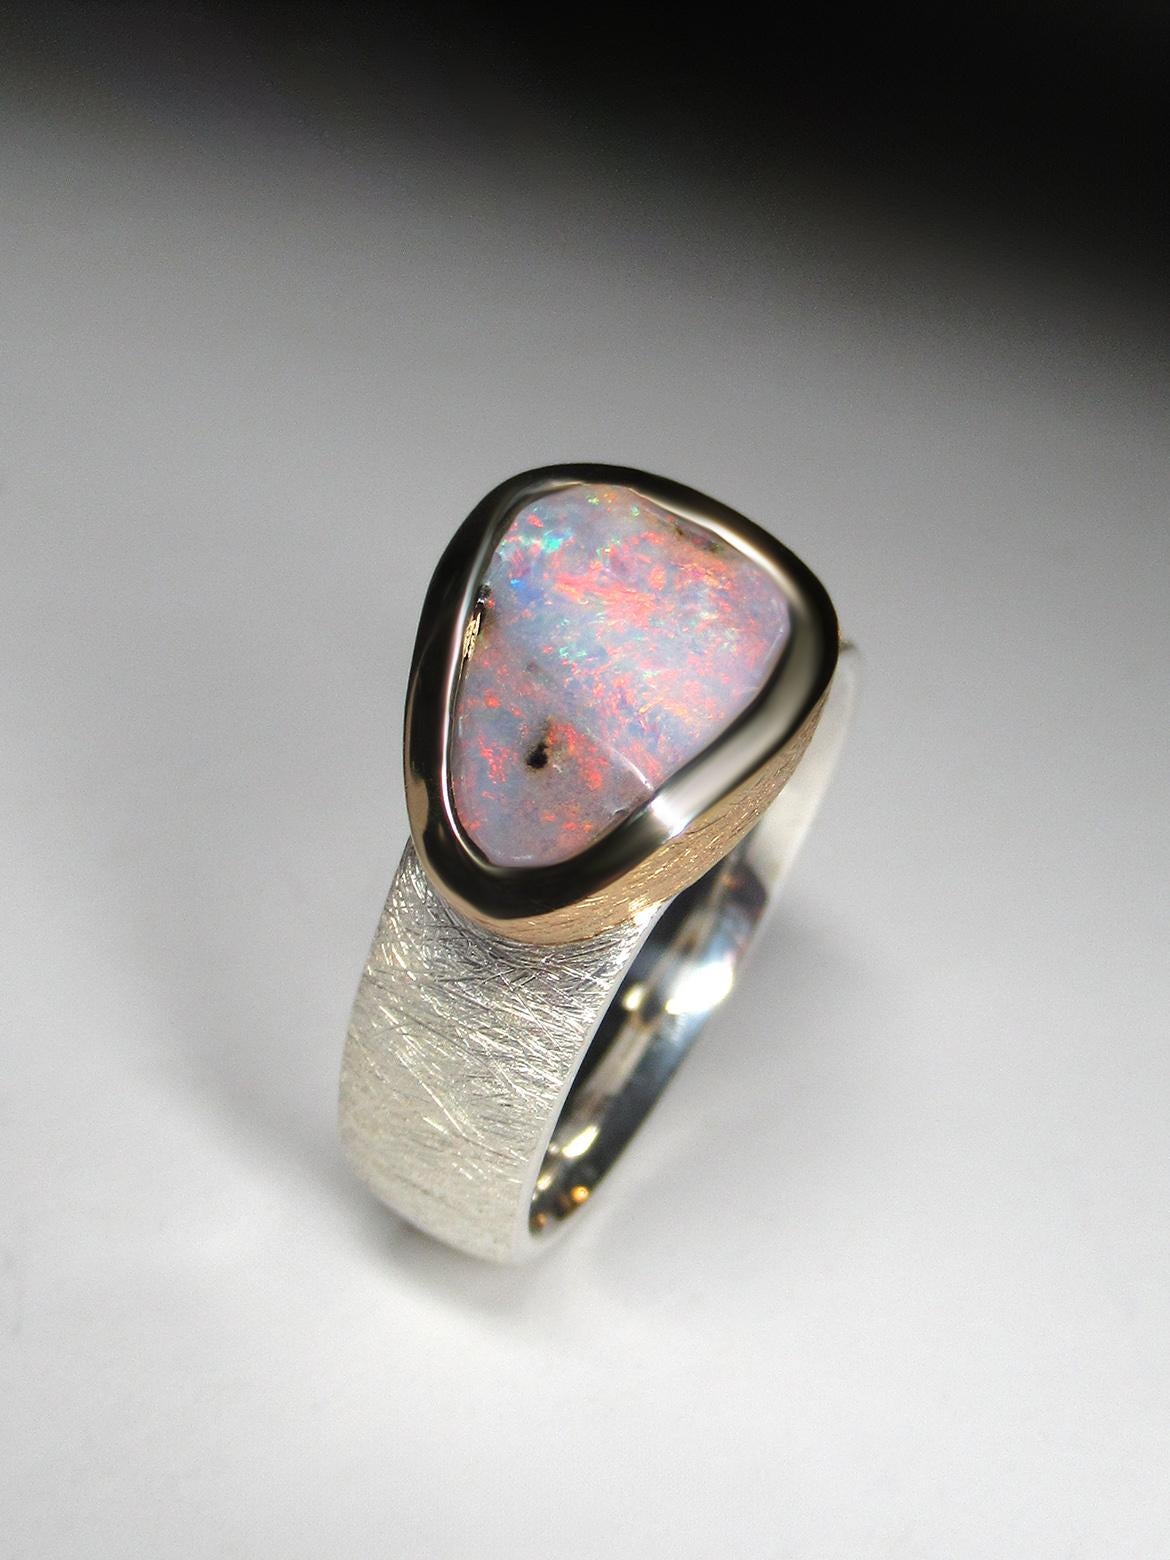 18K gold plated silver ring with natural free form shape Boulder Opal
Opal gemstone origin - Australia 
opal measurements  - 0.31 x 0.47 in / 8 х 12 mm
ring weight - 7.6 grams
ring size - 8 1/4 US
ref No 2452

Worldwide shipping from Berlin,